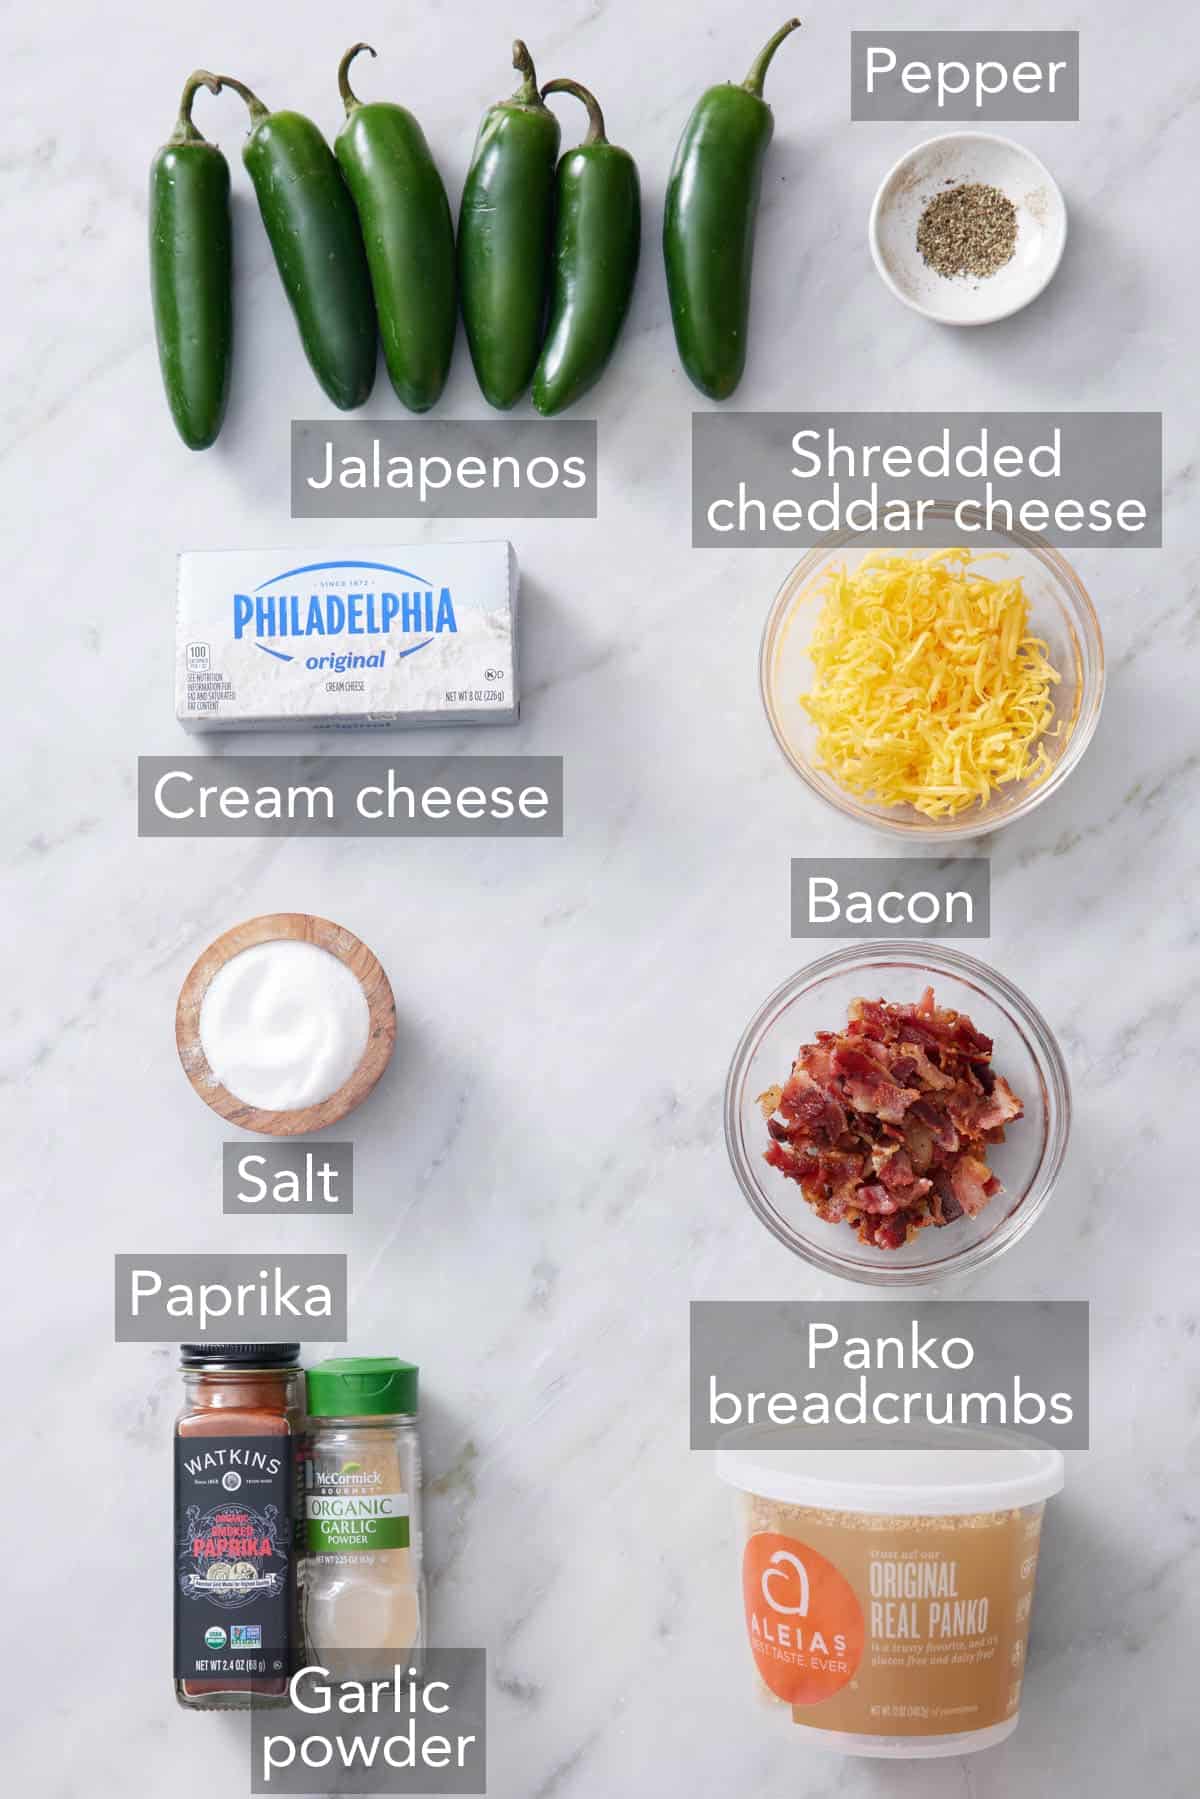 Ingredients needed for air fryer jalapeno poppers.